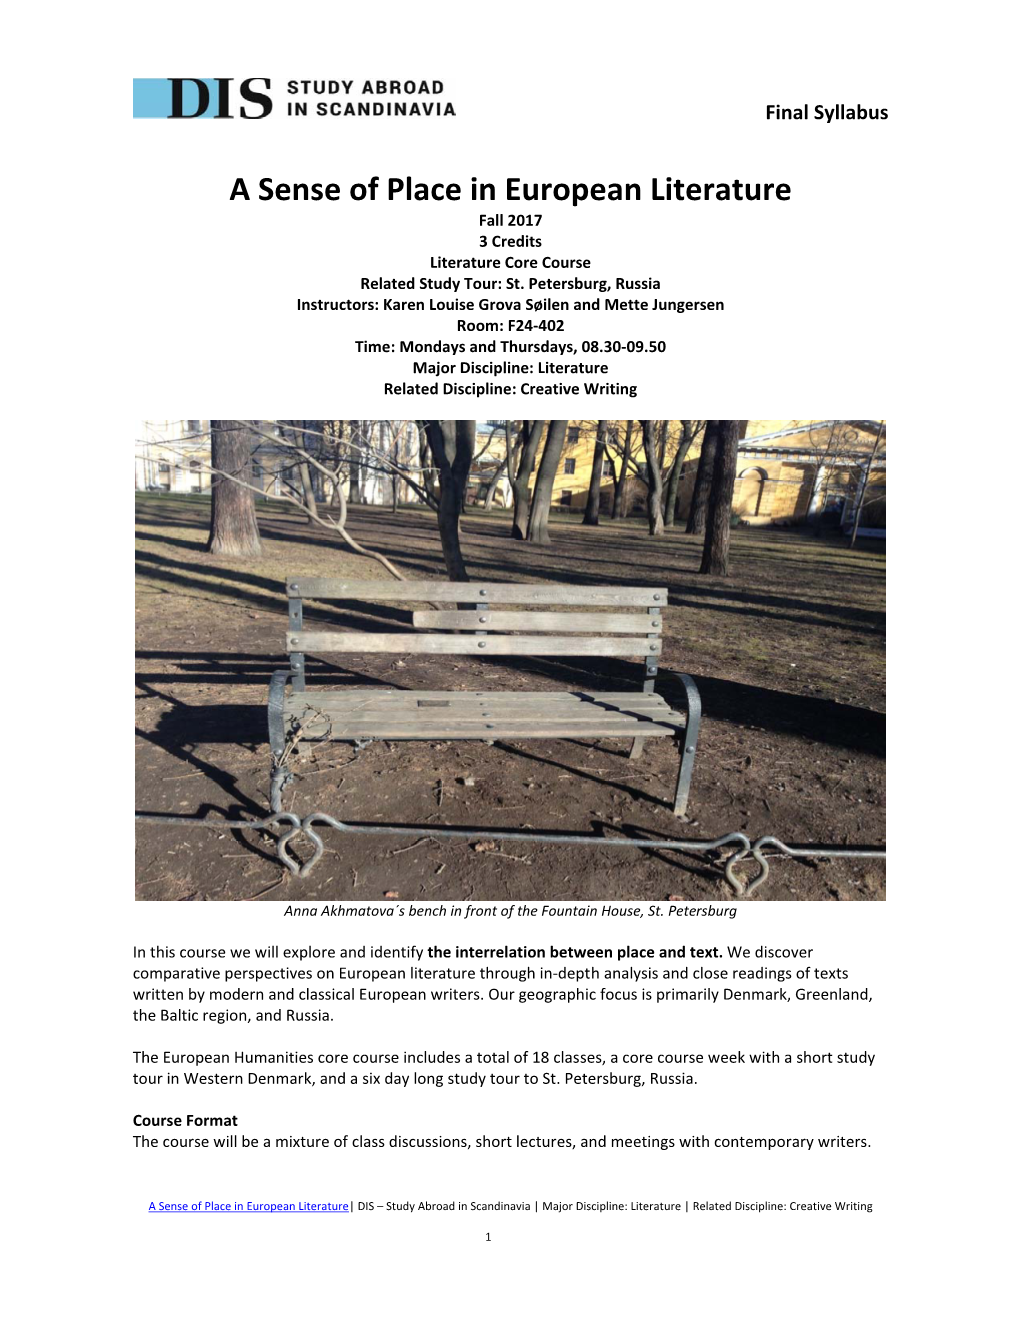 A Sense of Place in European Literature Fall 2017 3 Credits Literature Core Course Related Study Tour: St